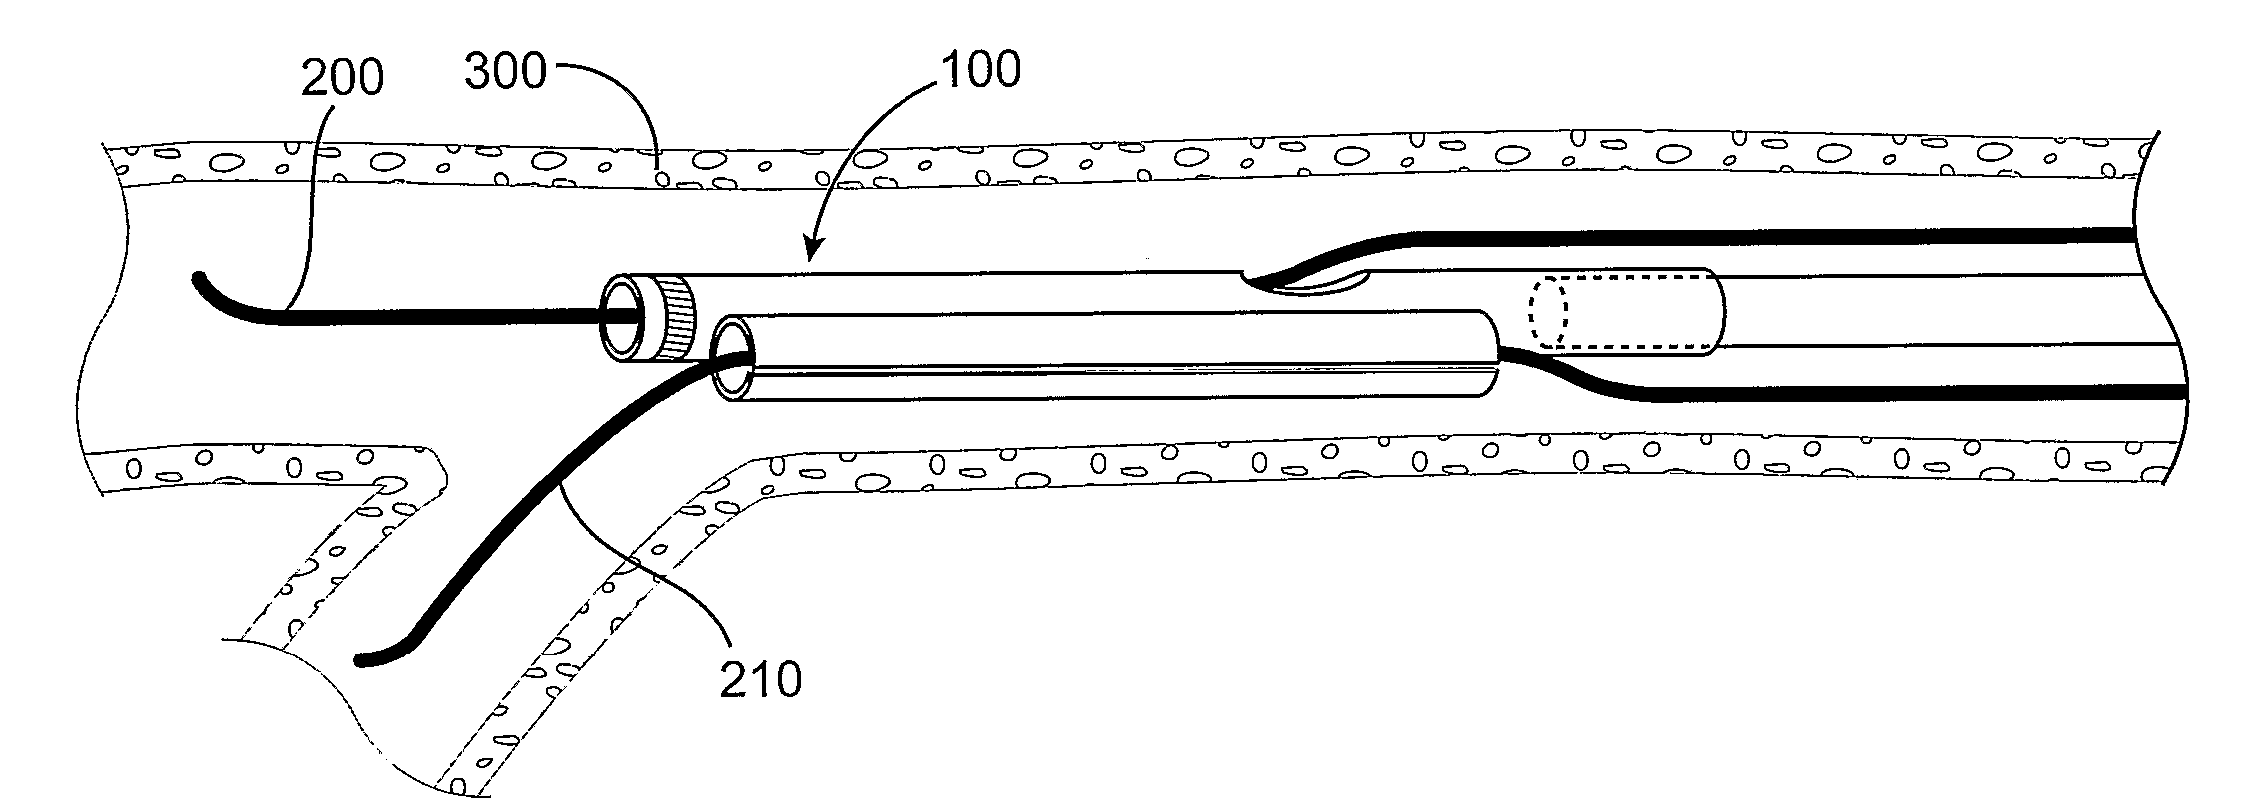 Guidewire Separator Device and Method of Use